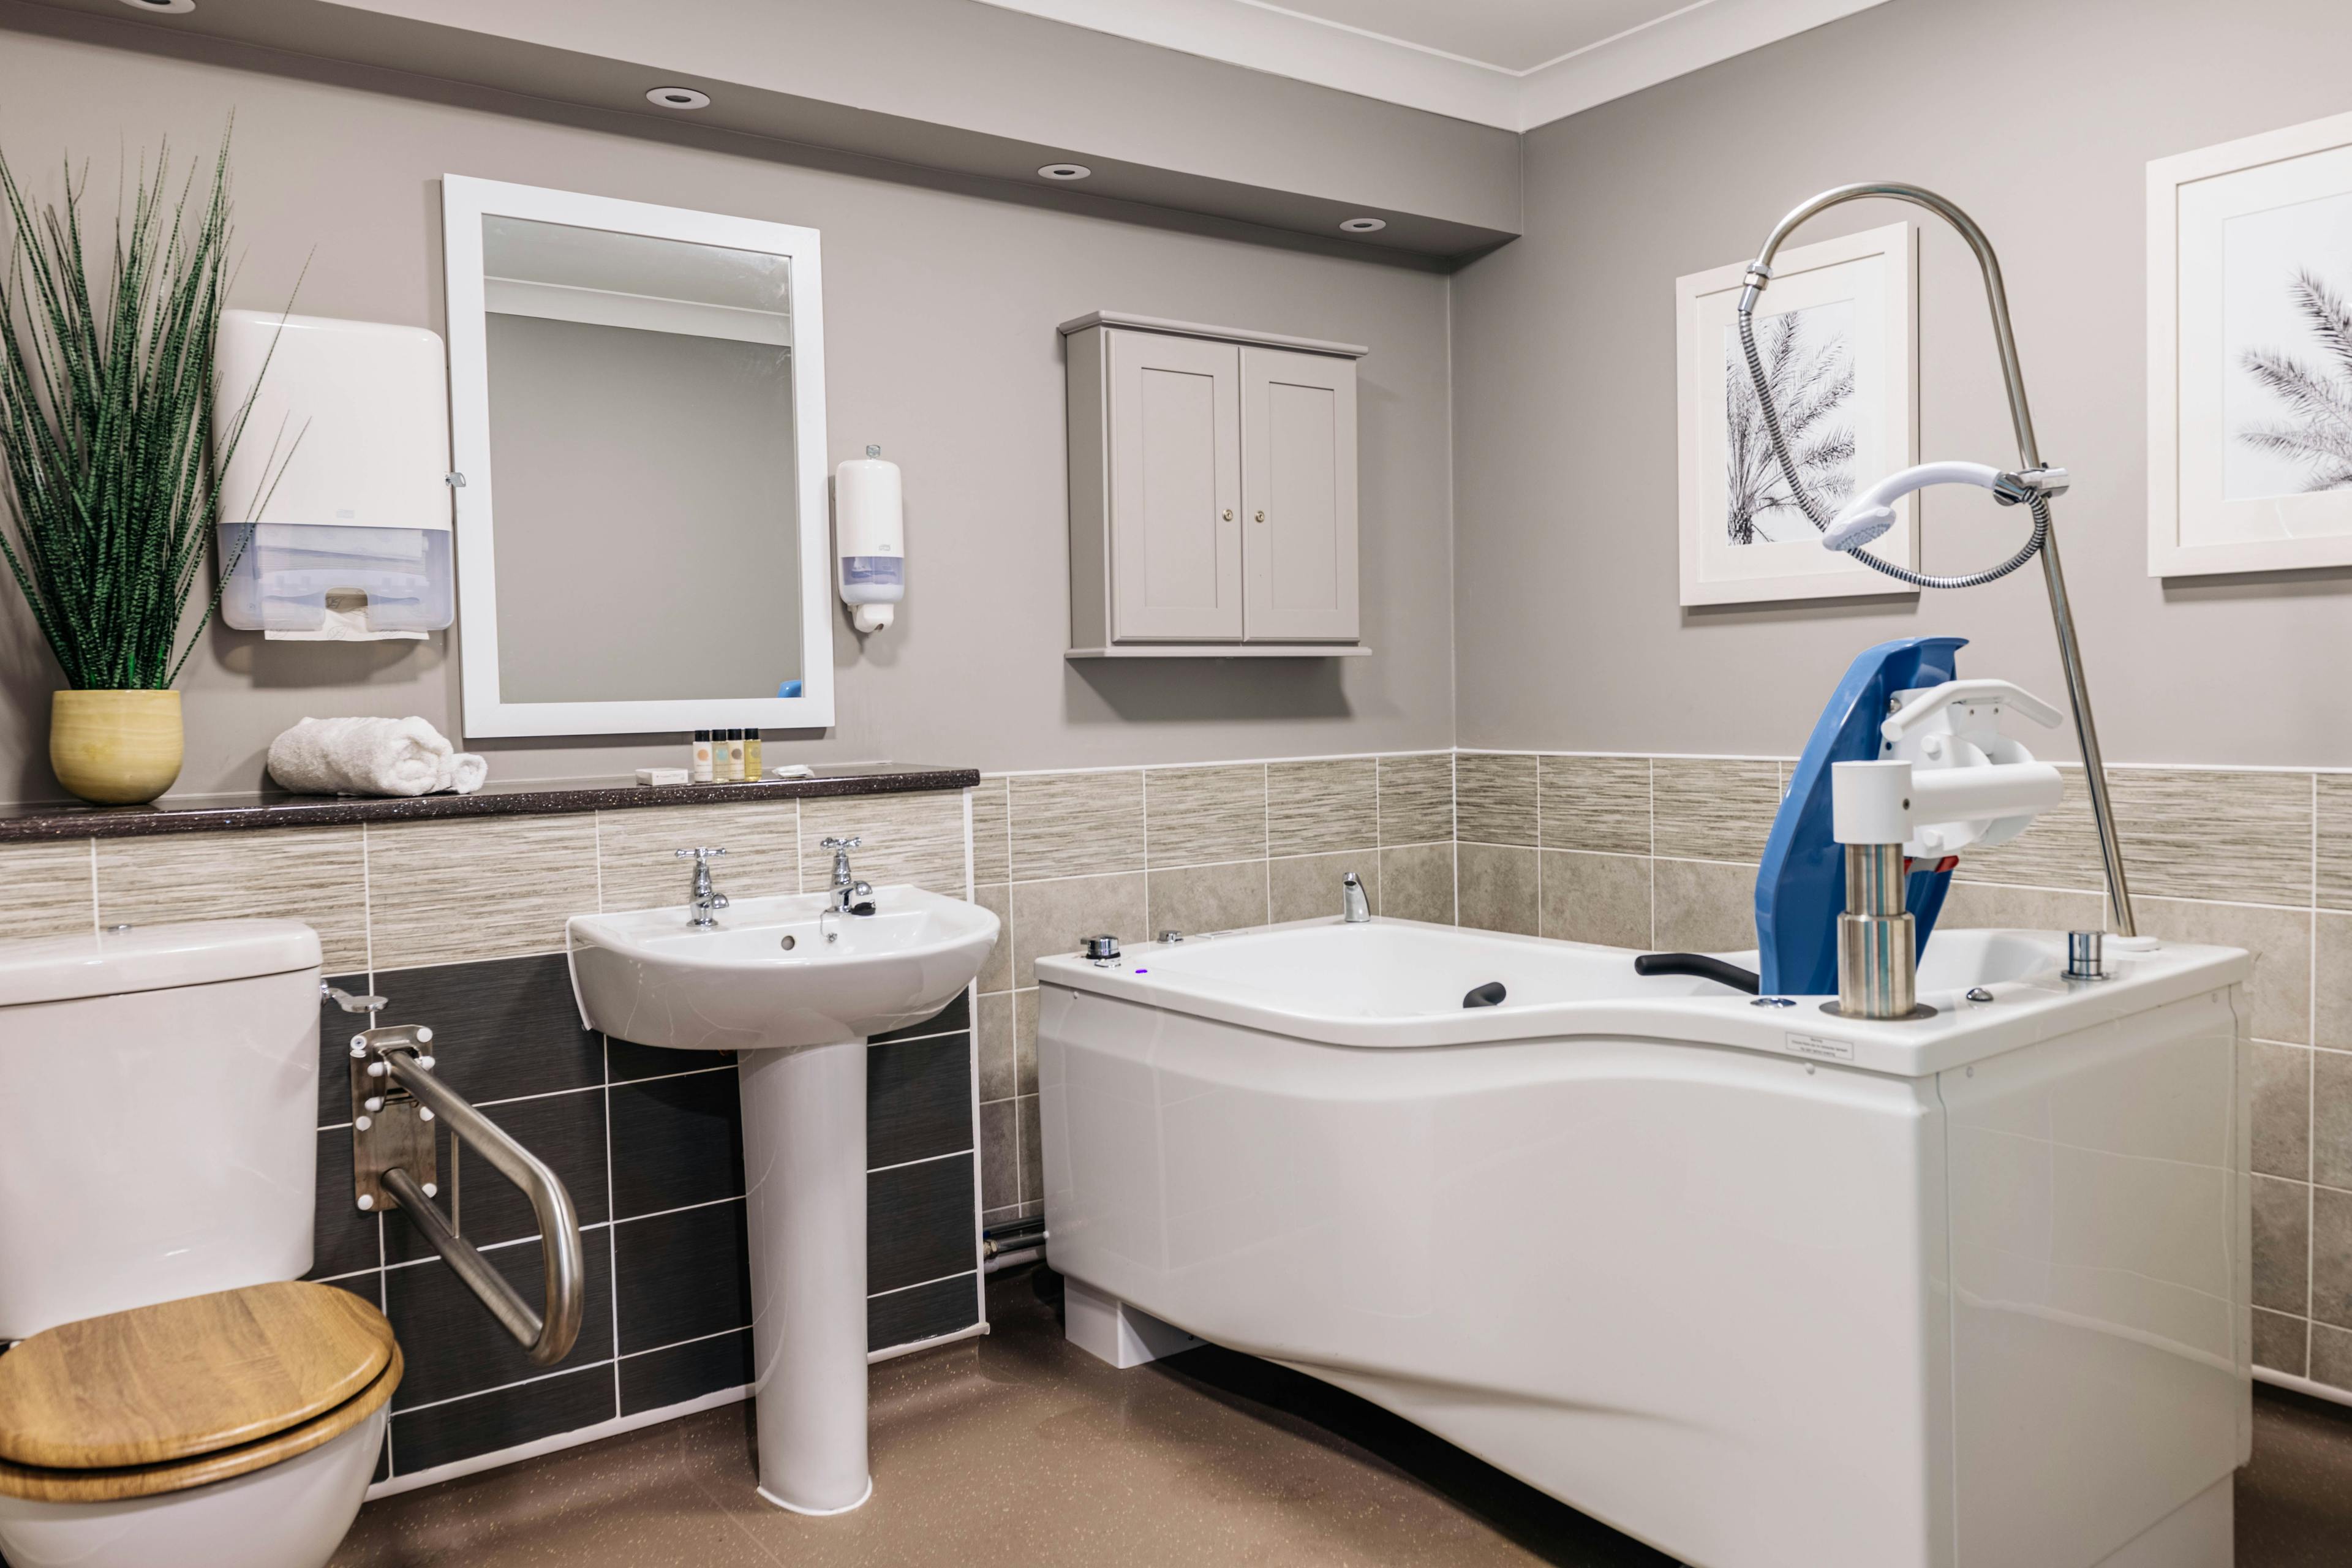 Spa Bathroom of Lawton Rise Care Home in Stoke-on-Trent, Staffordshire